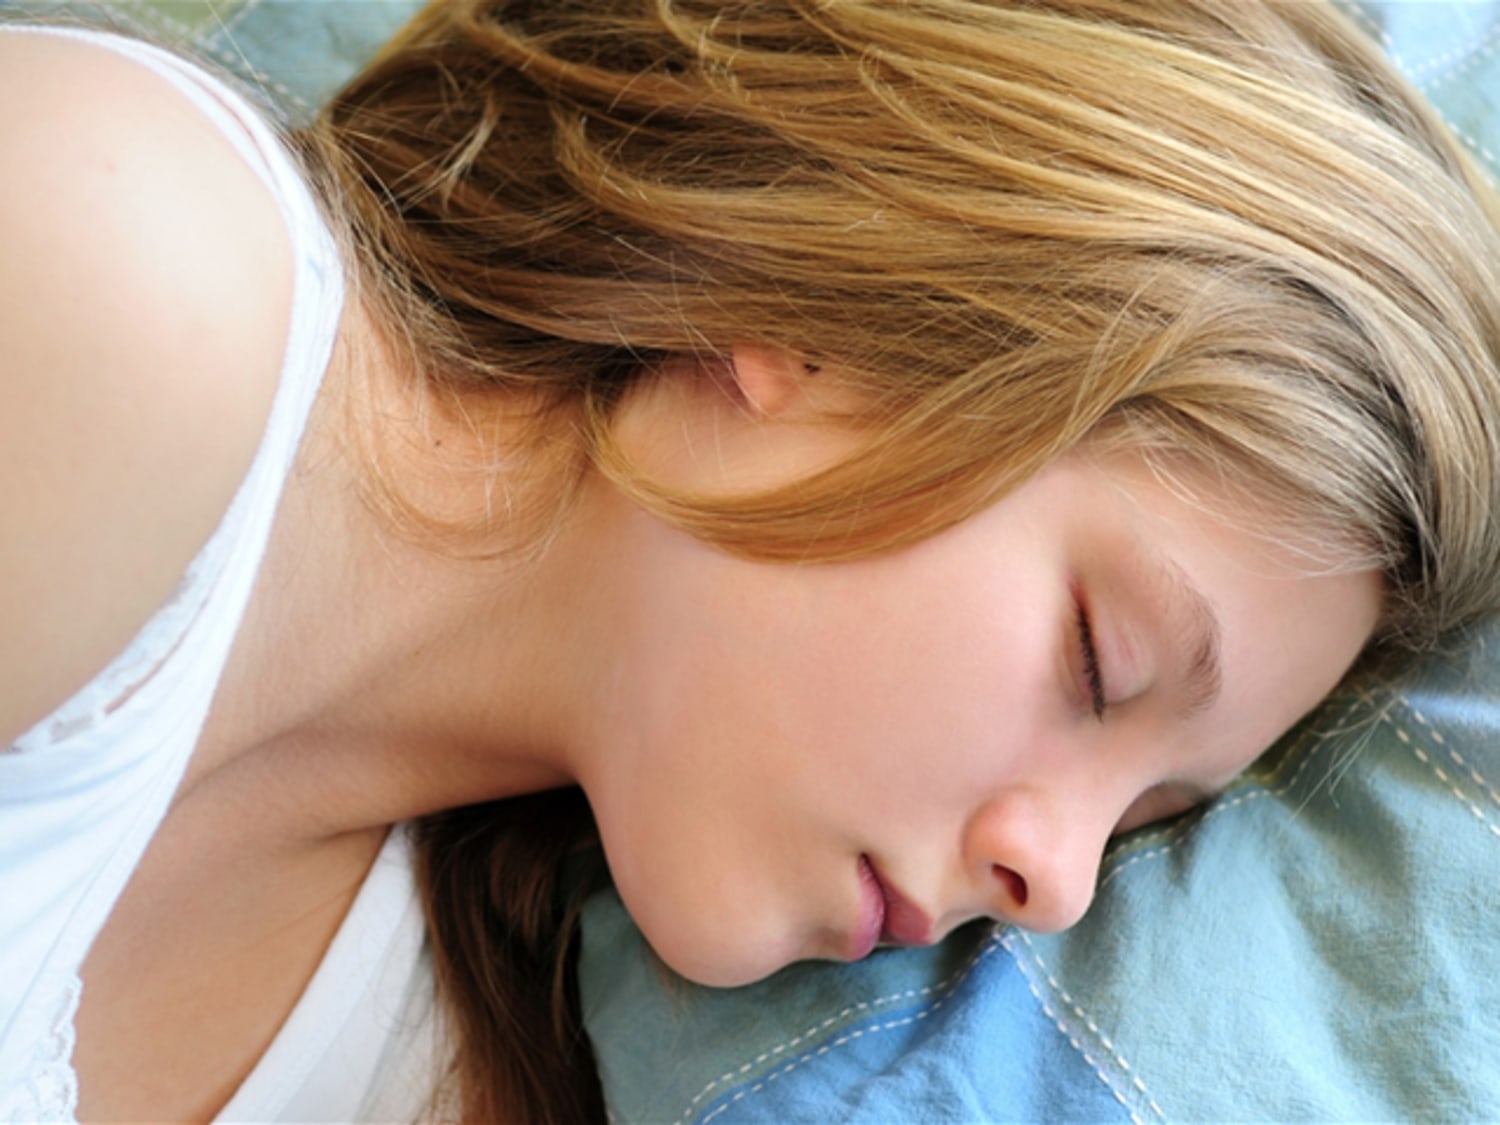 Sleeping beauty. Top view of beautiful young brown hair woman in